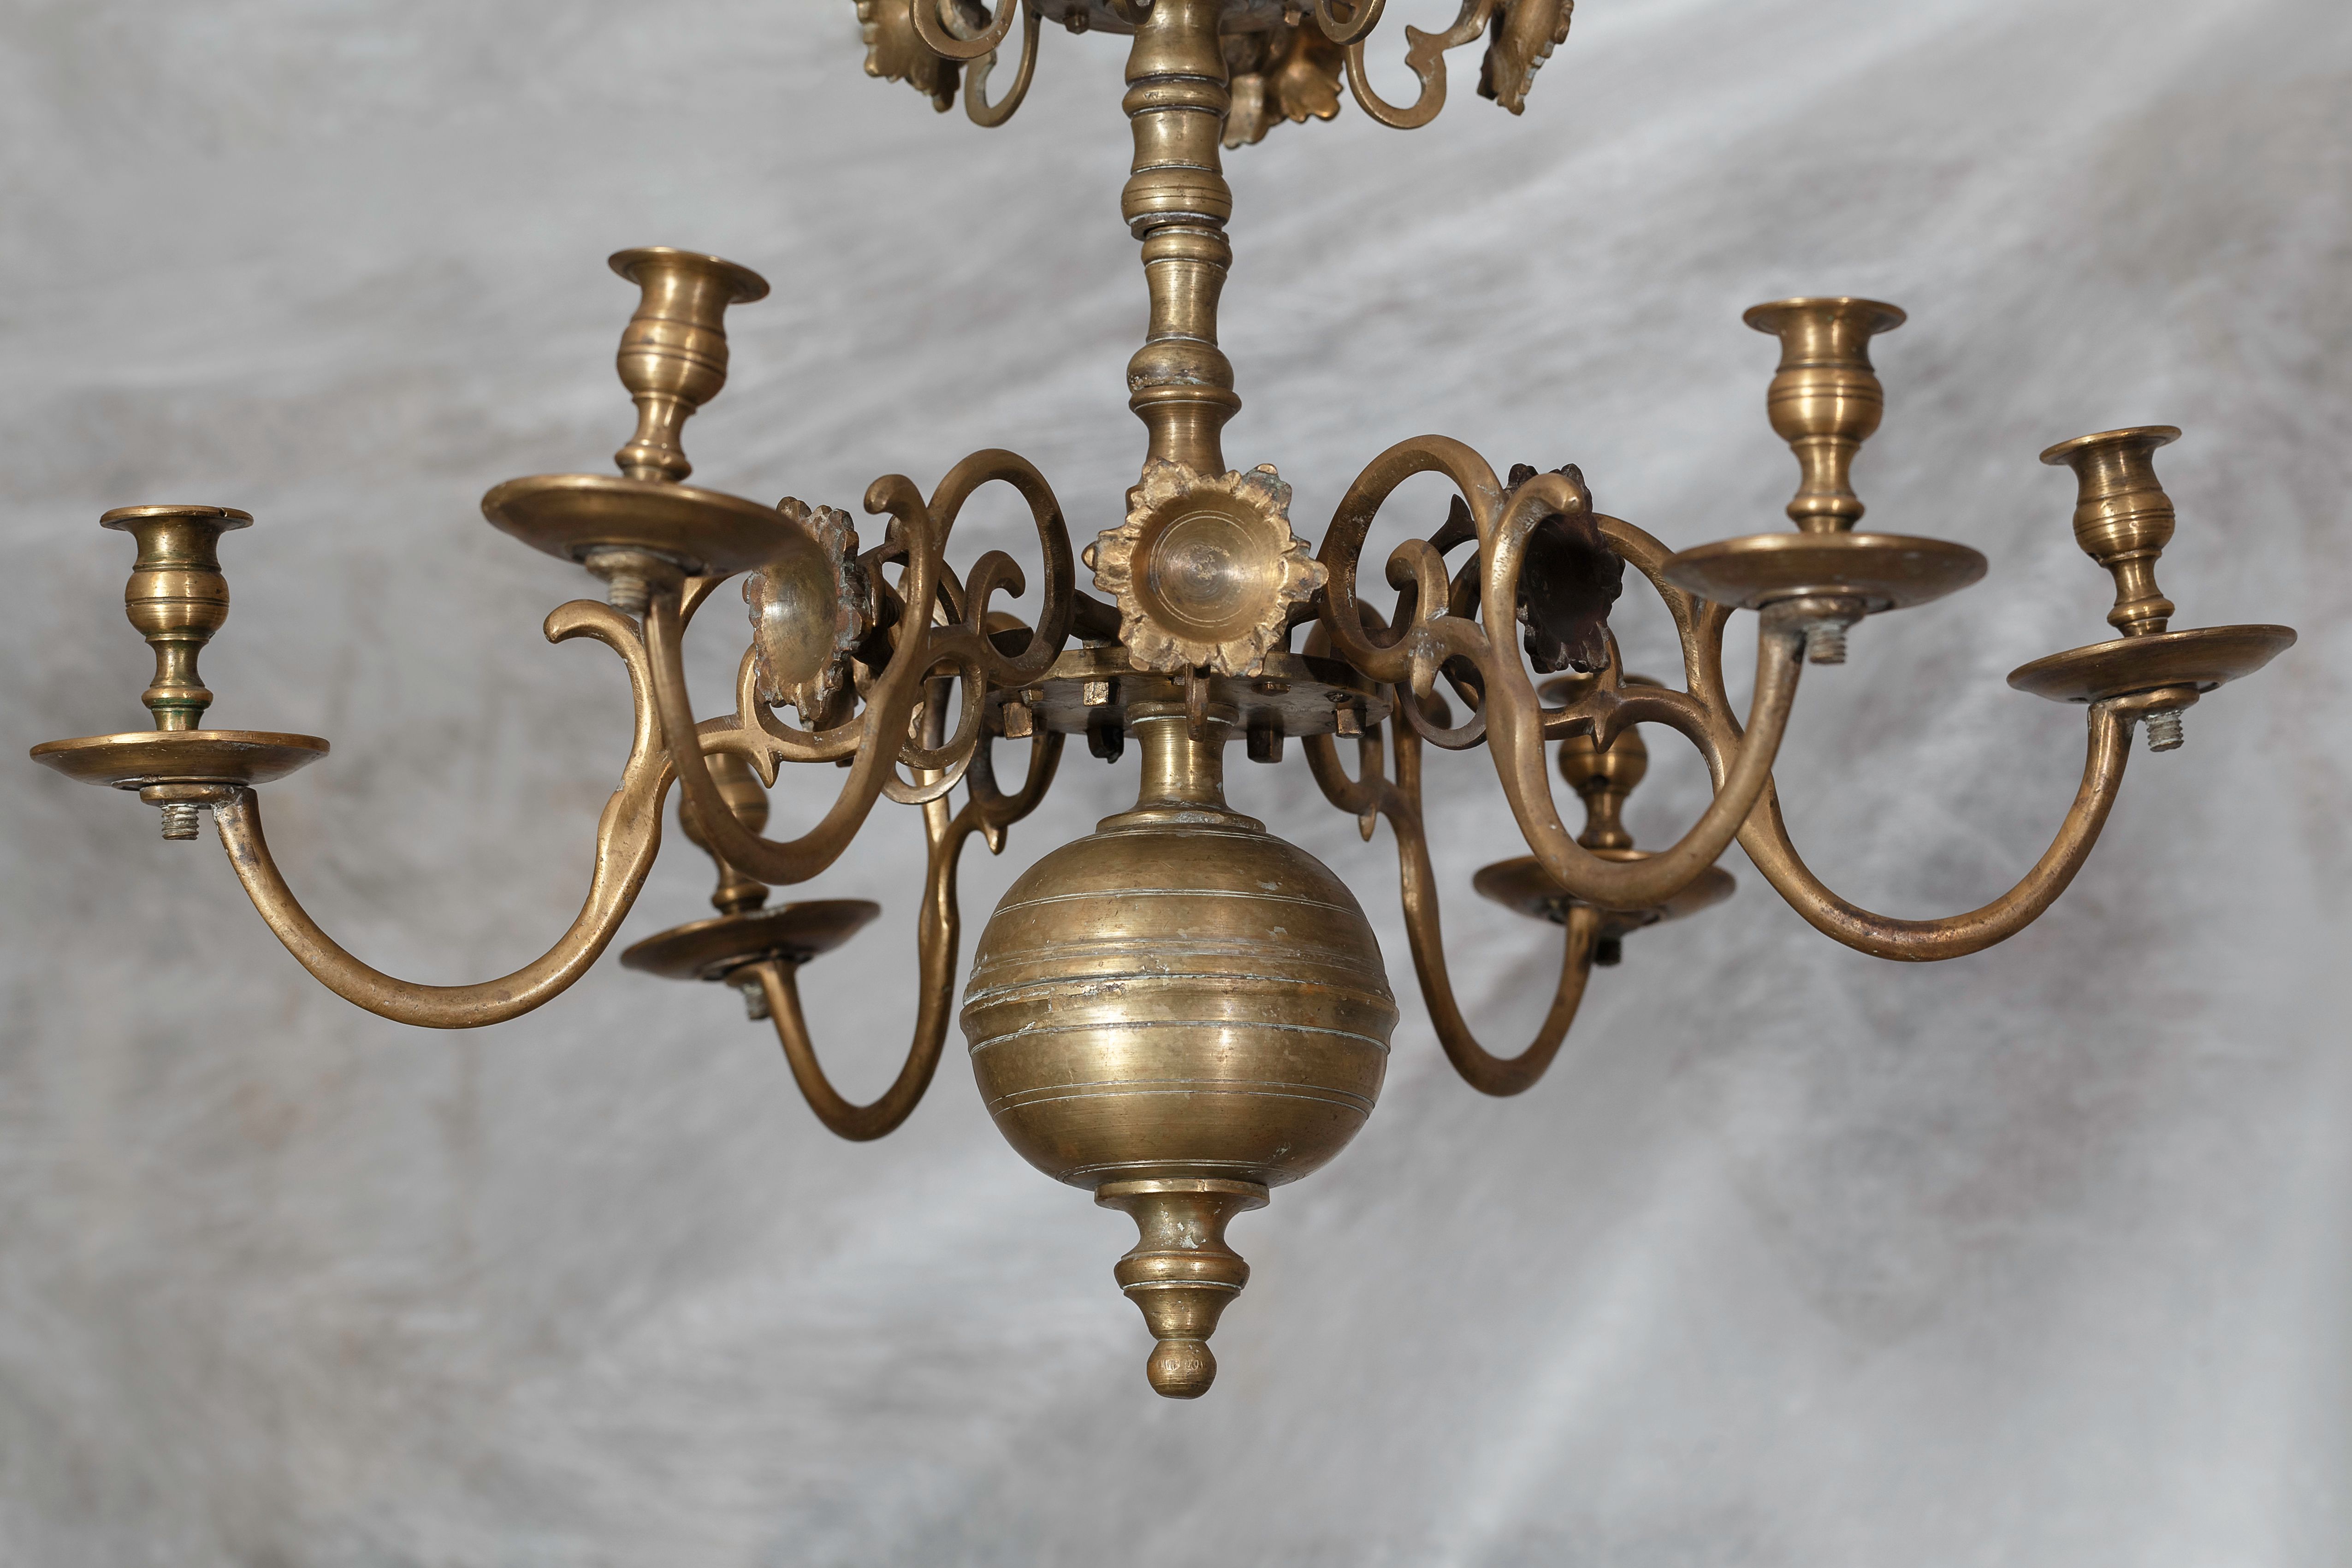 A fragment of the chandelier, the late 18th – 19th century, the National M. K. Čiurlionis Museum of Art, Tt-9556. Photo by Povilas Jarmala, 2019